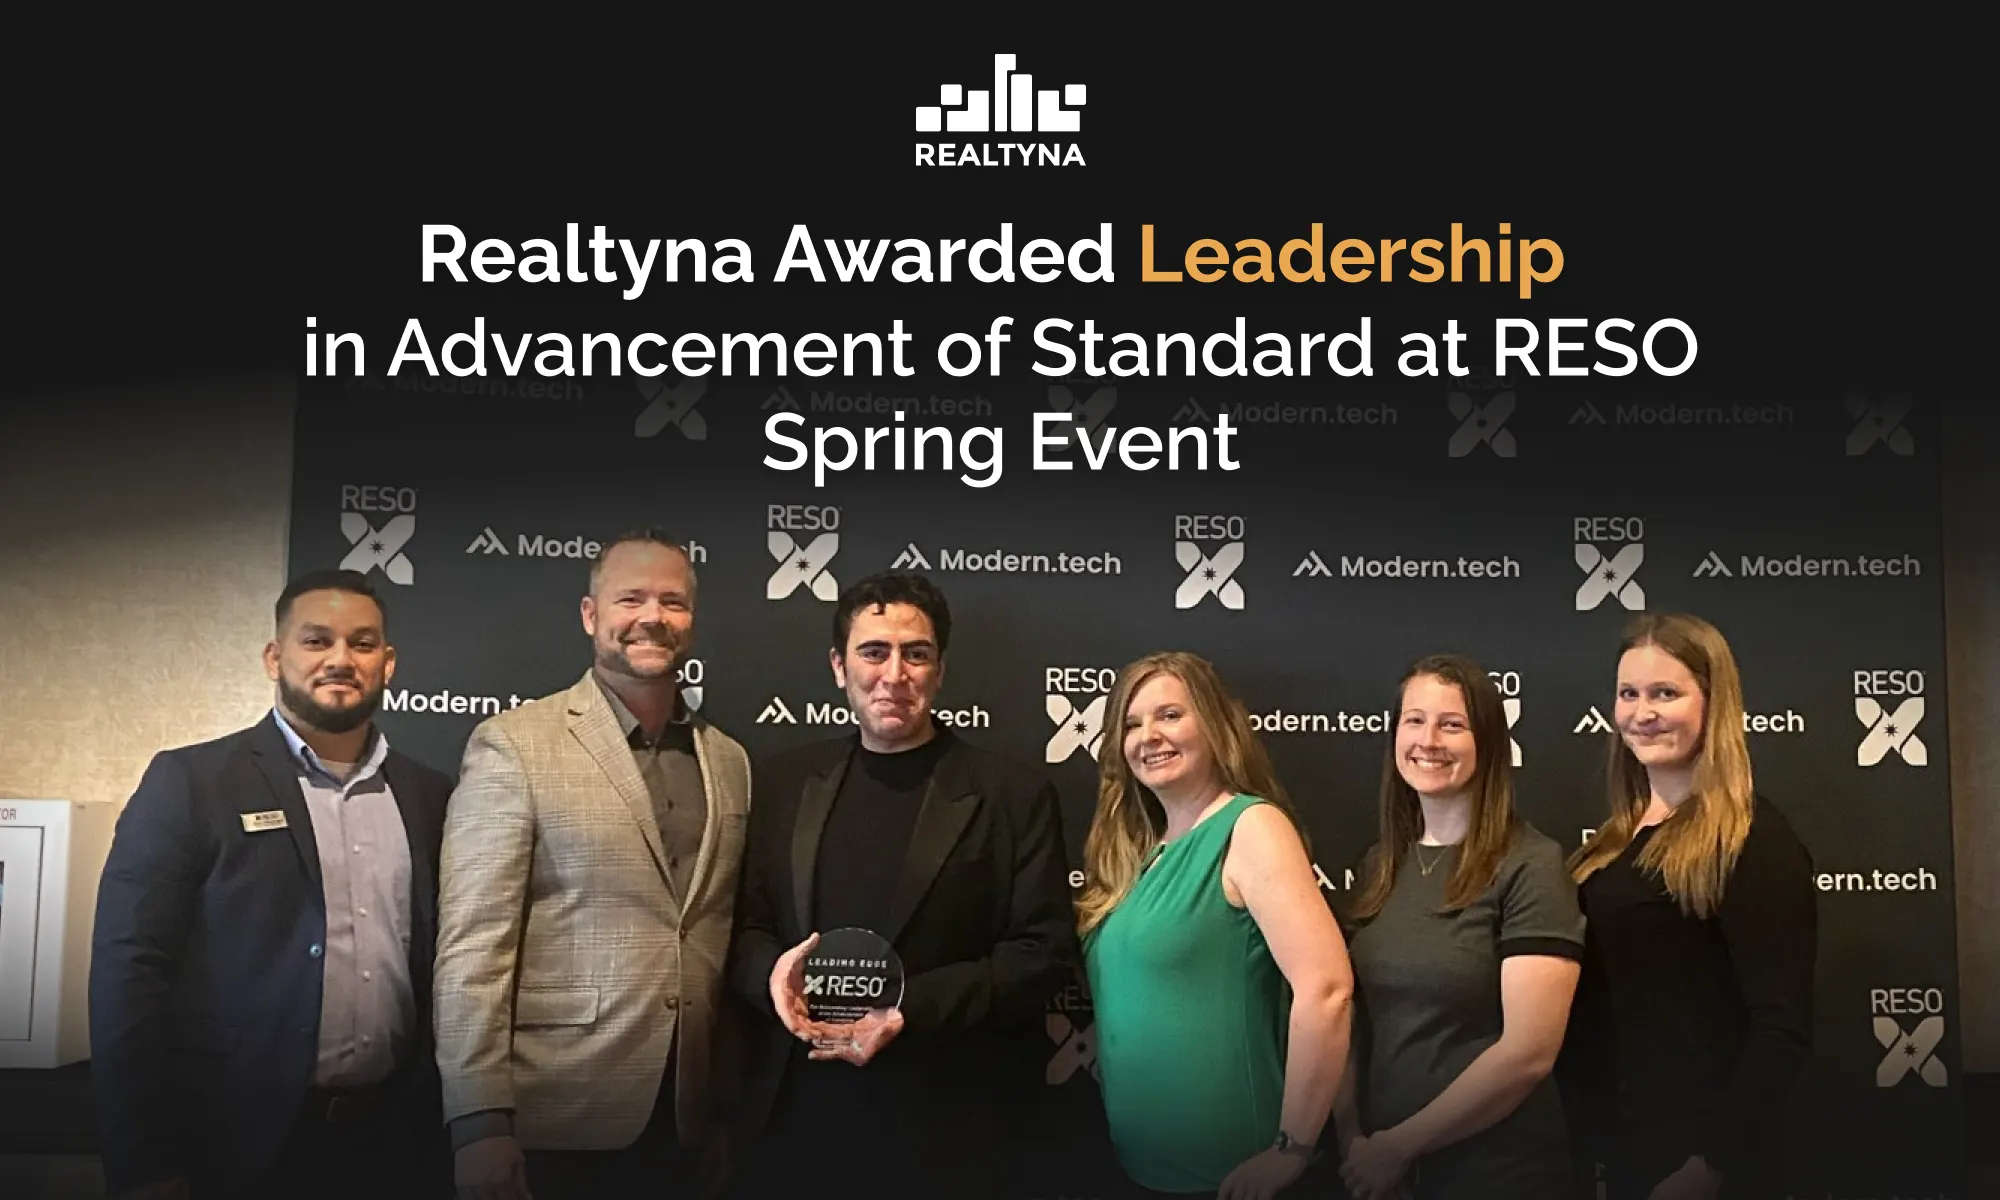 Realtyna Award RESO Spring Event